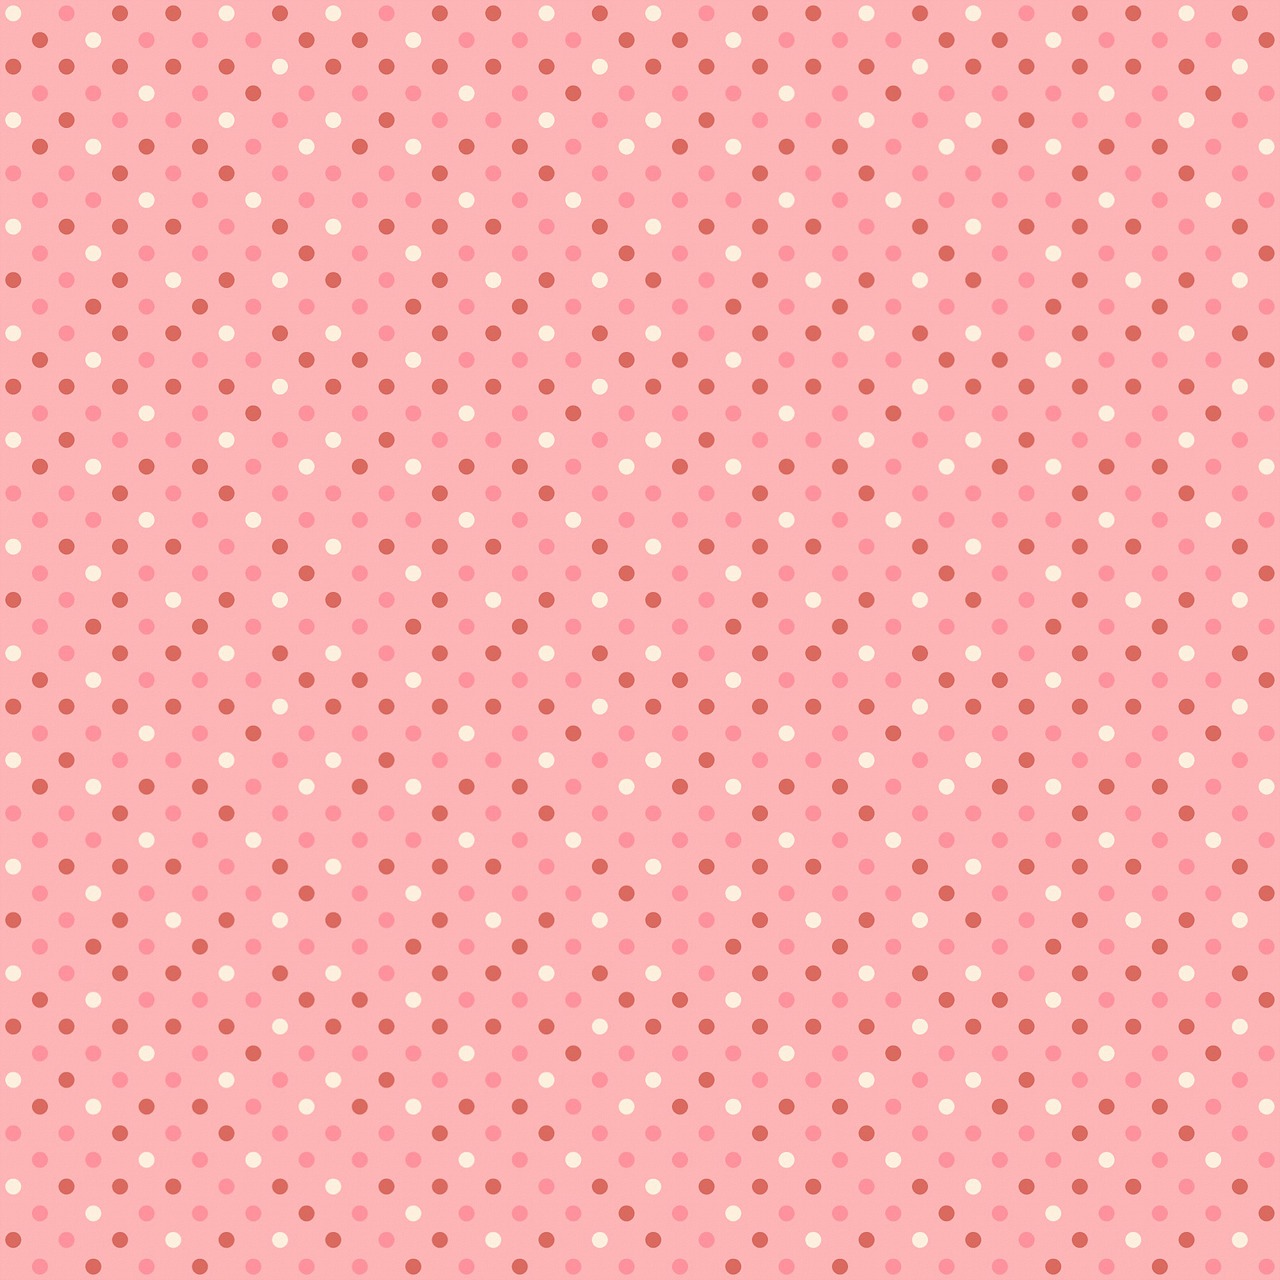 a pink and white polka dot pattern, a digital rendering, inspired by Georges Lemmen, twinkling stars, roses background, in shades of peach, nerds